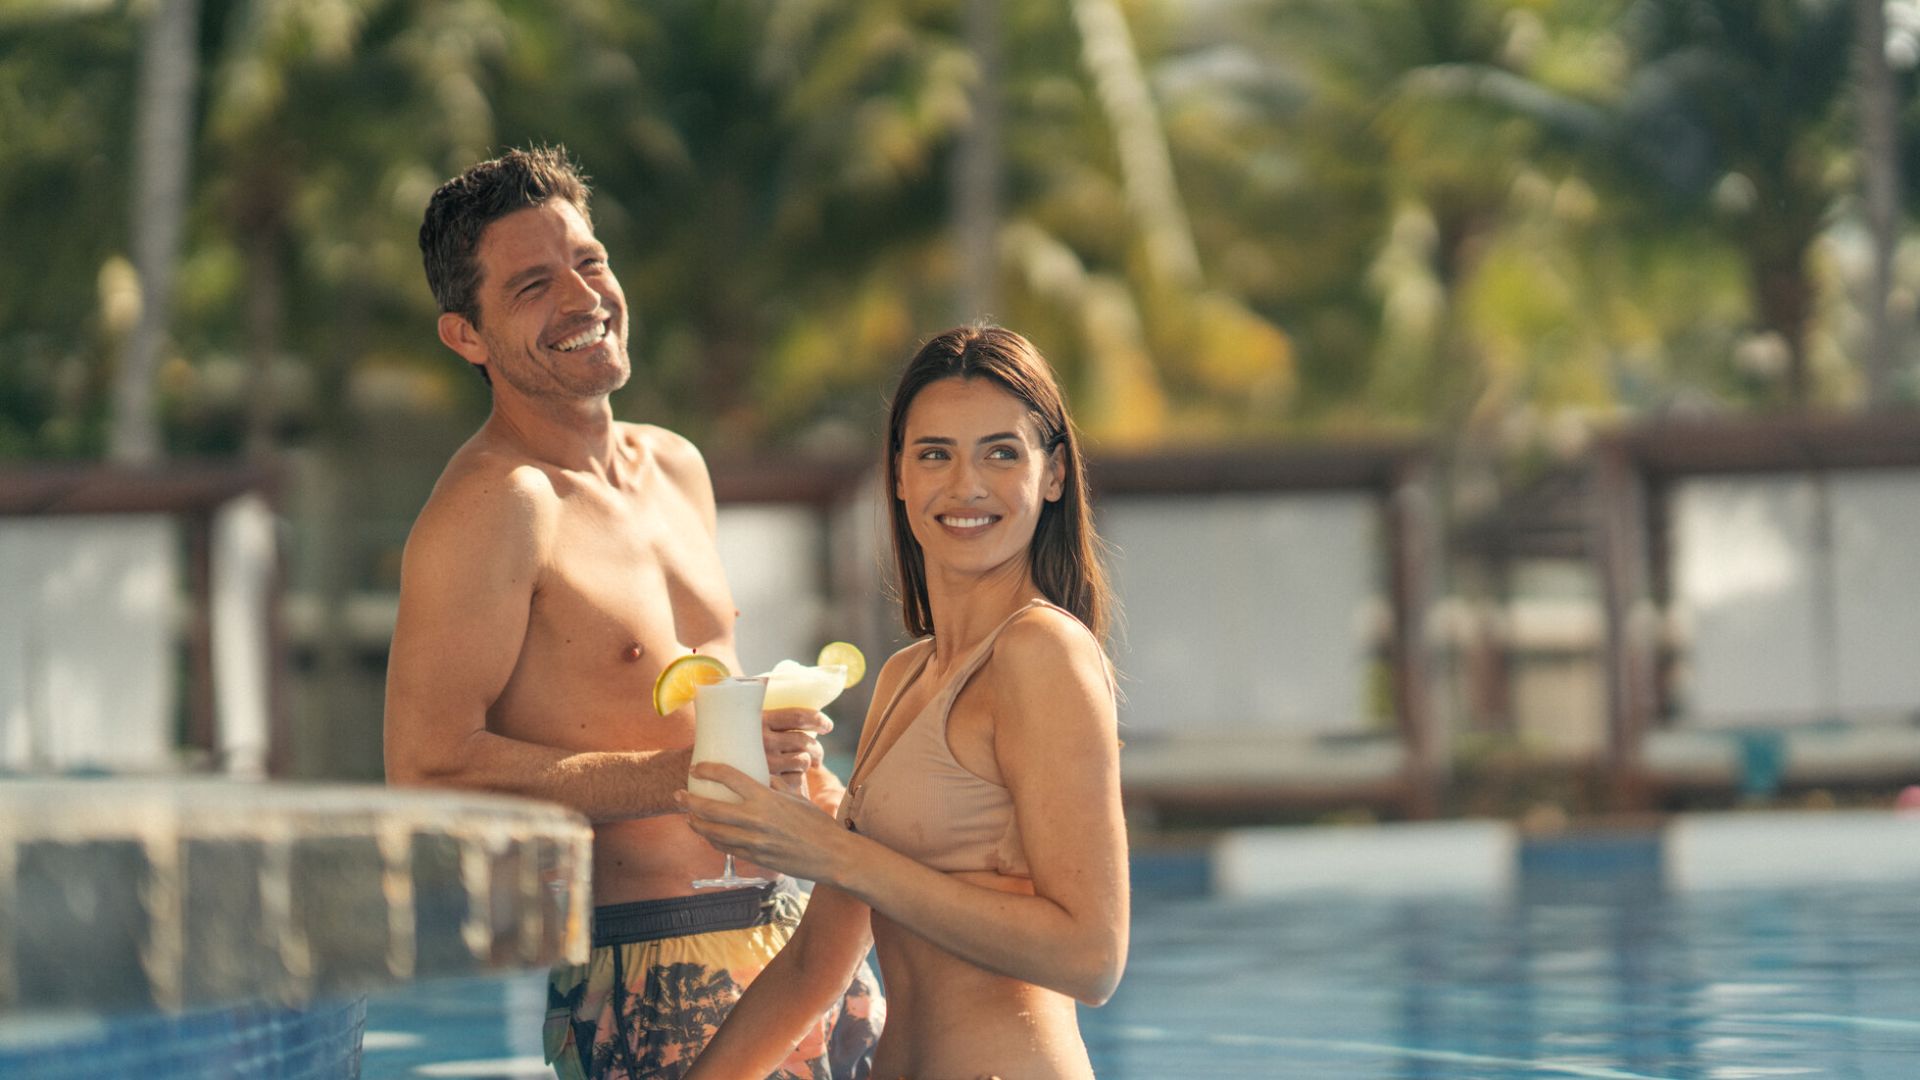 A Man And Woman In Swimsuits By A Pool